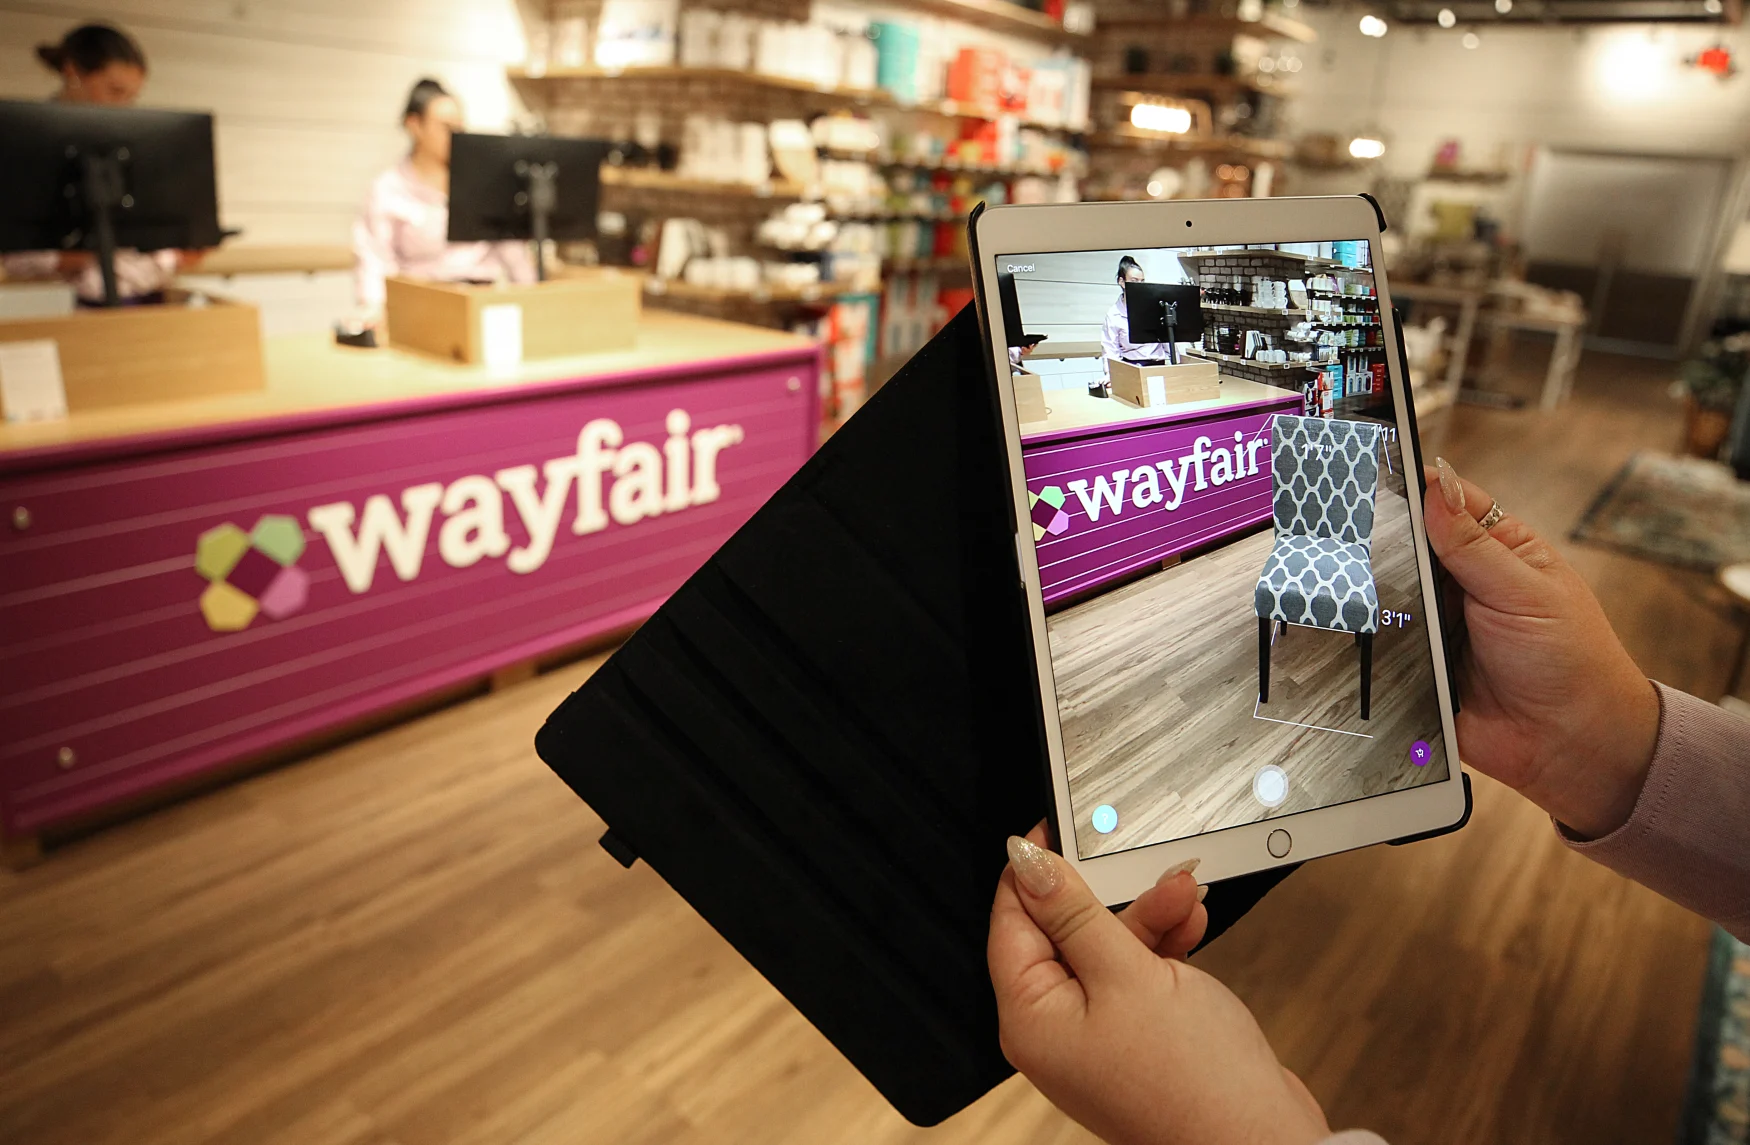 NATICK, MA - AUGUST 20: A virtual reality app is demonstrated in the first Wayfair store at Natick Mall in Natick, MA on August 20, 2019. Shoppers can put on virtual reality headsets to see how the furniture would fit together in a space, using Wayfairs Room Planning Tool.  They can virtually hop on a dining room table for a 360-degree view of a digitally rendered room, then swap chairs, chandeliers and artwork on the virtual walls.  That's just one example of how the Boston-based e-commerce giant has used its digital DNA to create its first brick-and-mortar store.  Opens Wednesday at the Natick Mall.  Product information, including prices and customer ratings, is displayed on screens that update in real time to reflect price changes online.  Employees carry iPads with an augmented reality tool that makes furniture appear in a three-dimensional environment, or they can snap a photo of an item in the store and find dozens of similar ones online.  (Photo by Suzanne Kreiter/The Boston Globe via Getty Images)